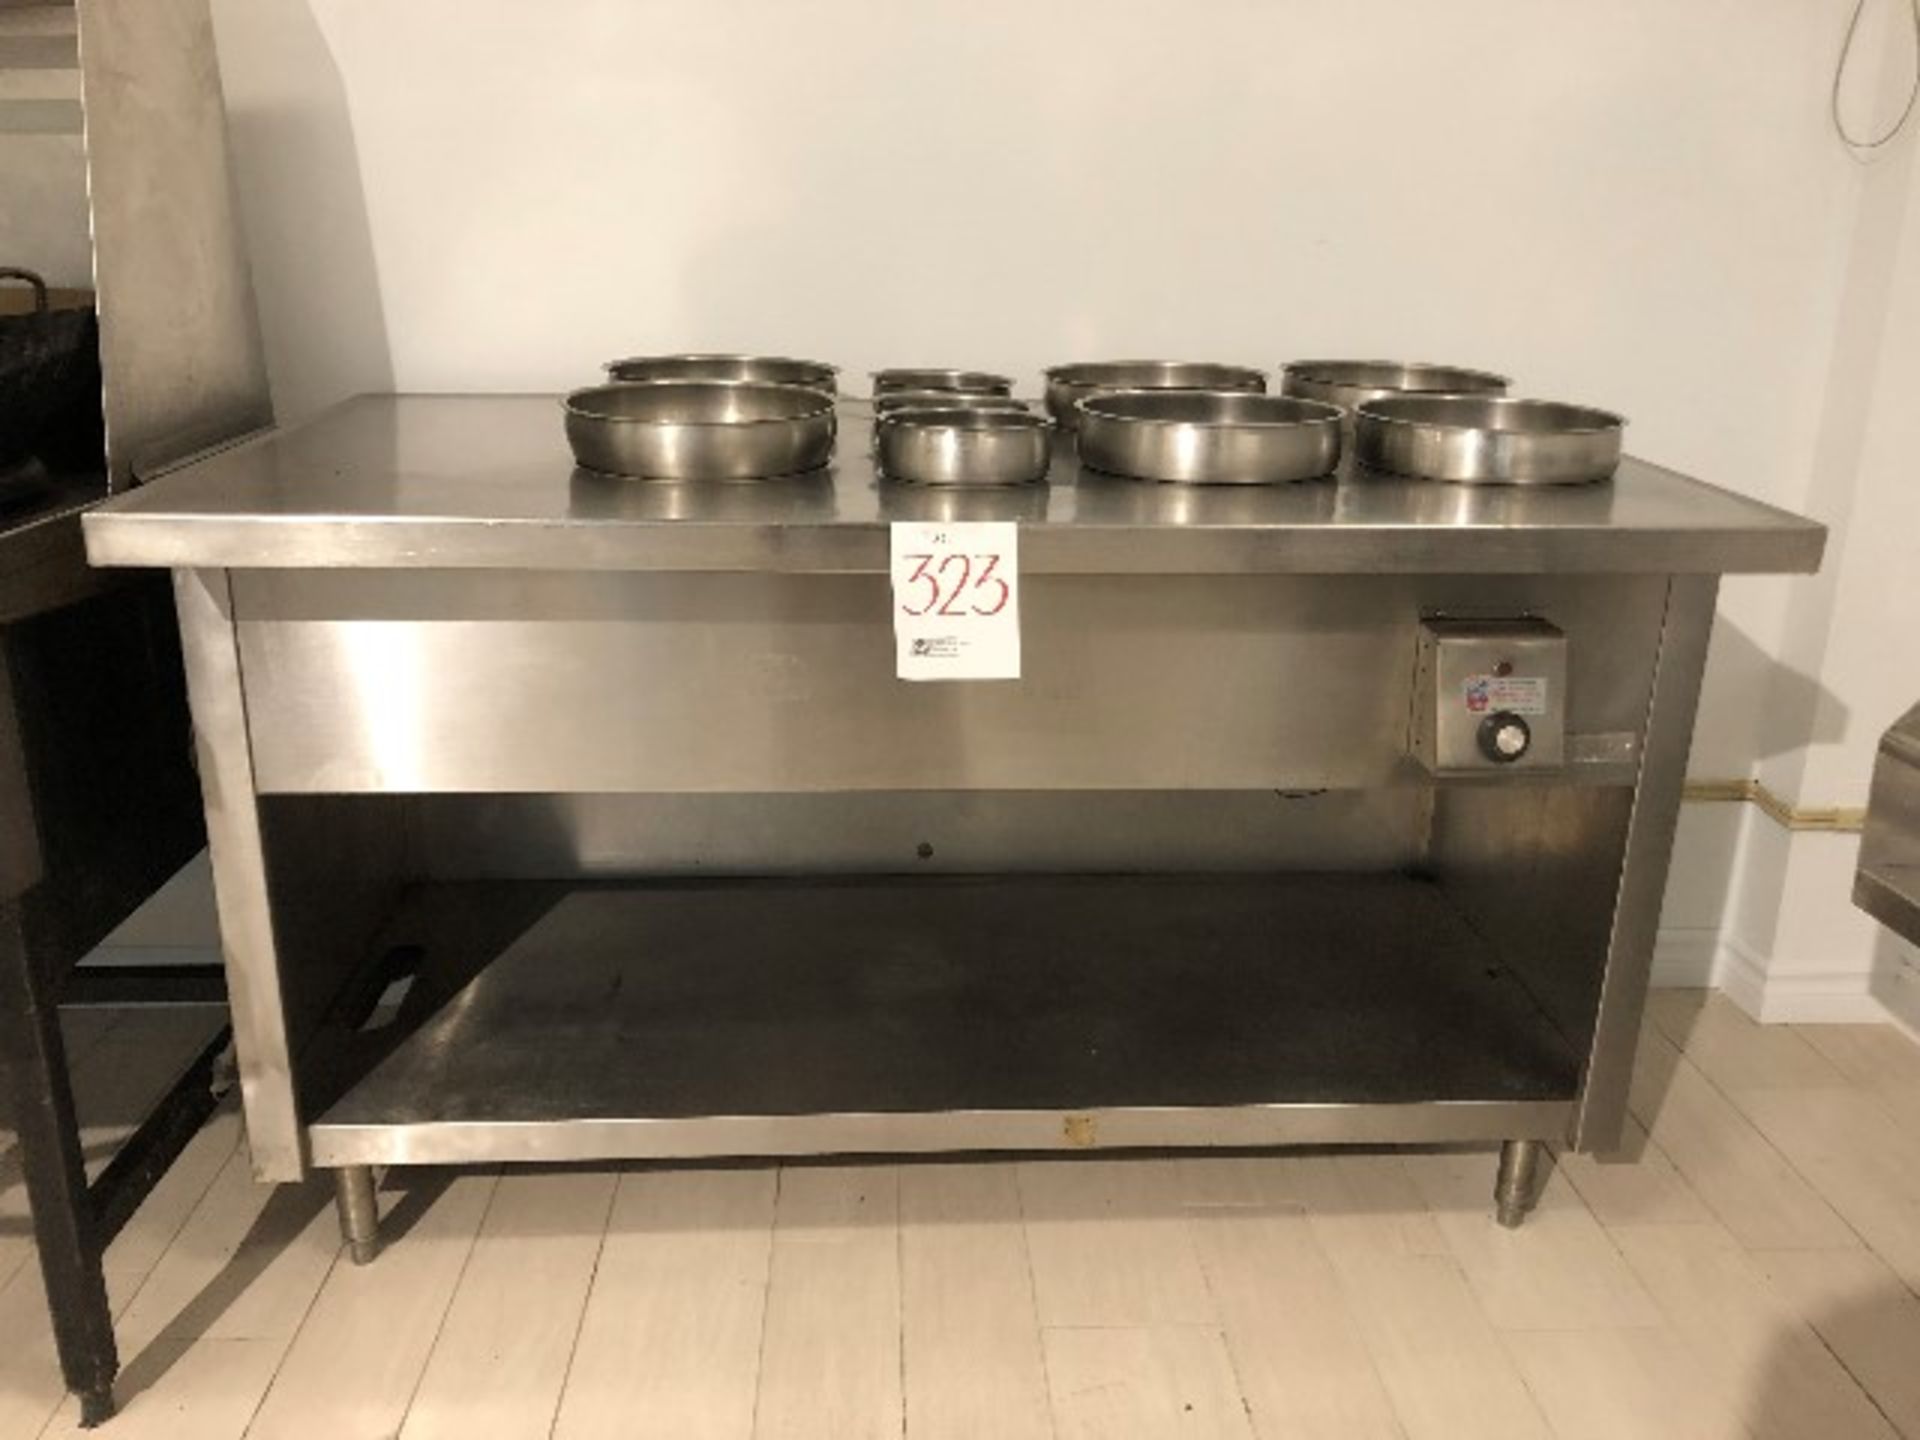 Stainless steel steam table, 60”